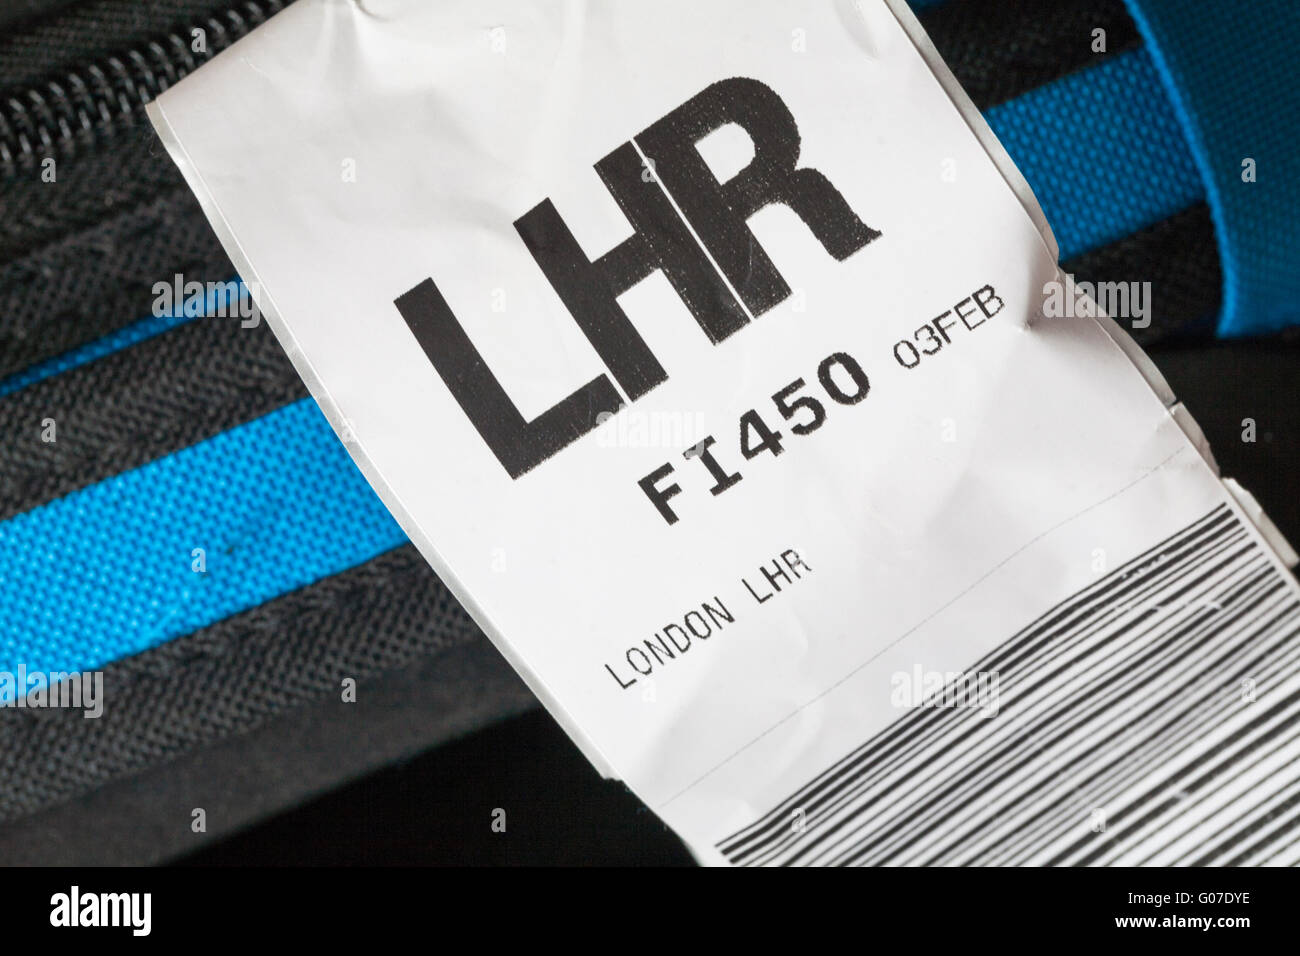 IcelandAir luggage label stuck on case for LHR London Heathrow airport in England UK Stock Photo